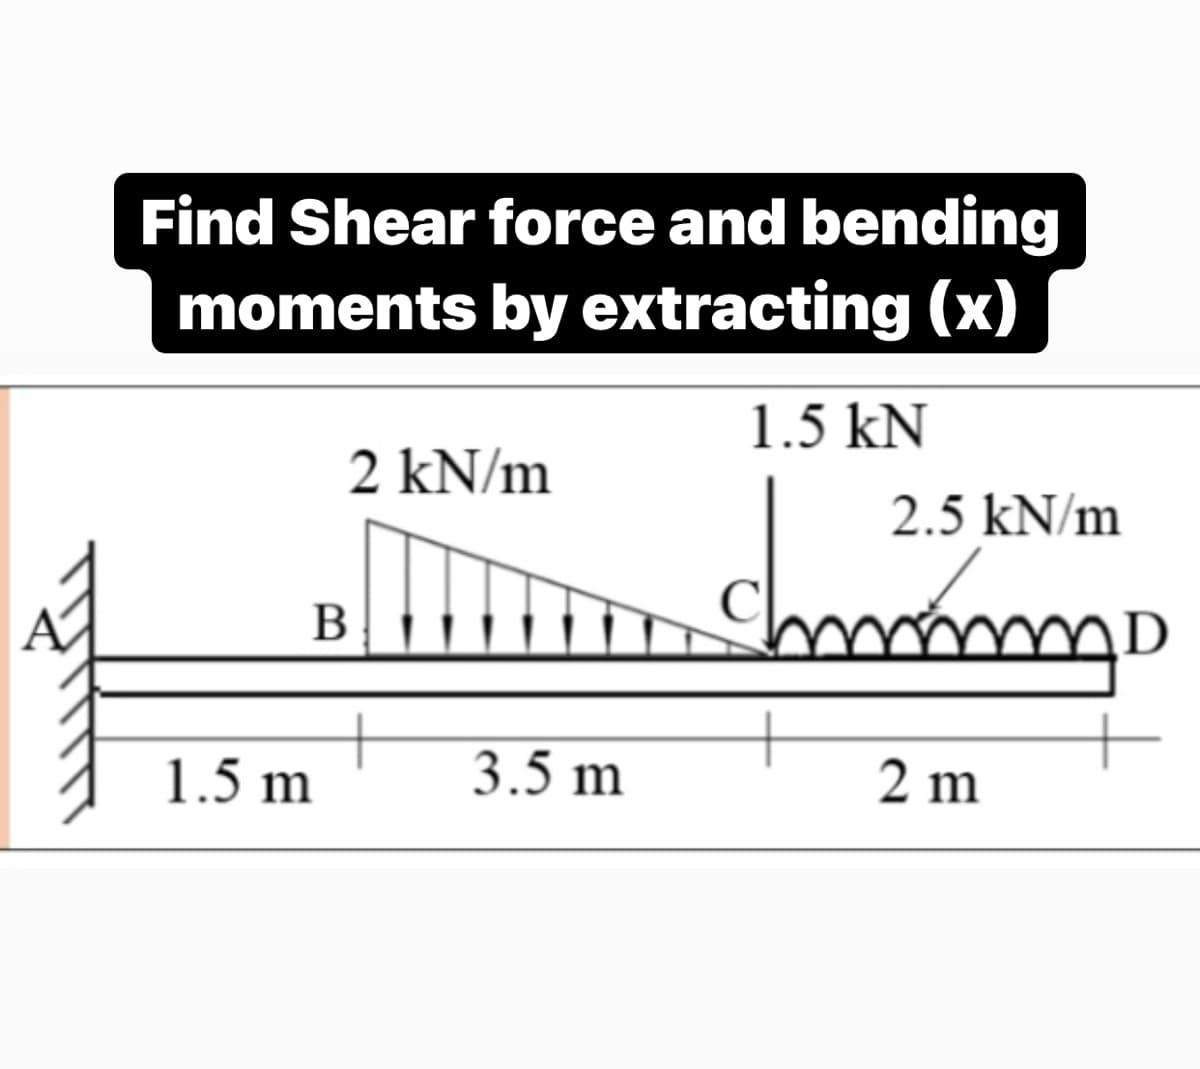 Find Shear force and bending
moments by extracting (x)
1.5 kN
2 kN/m
2.5 kN/m
mmp
B
1.5 m
3.5 m
2 m
